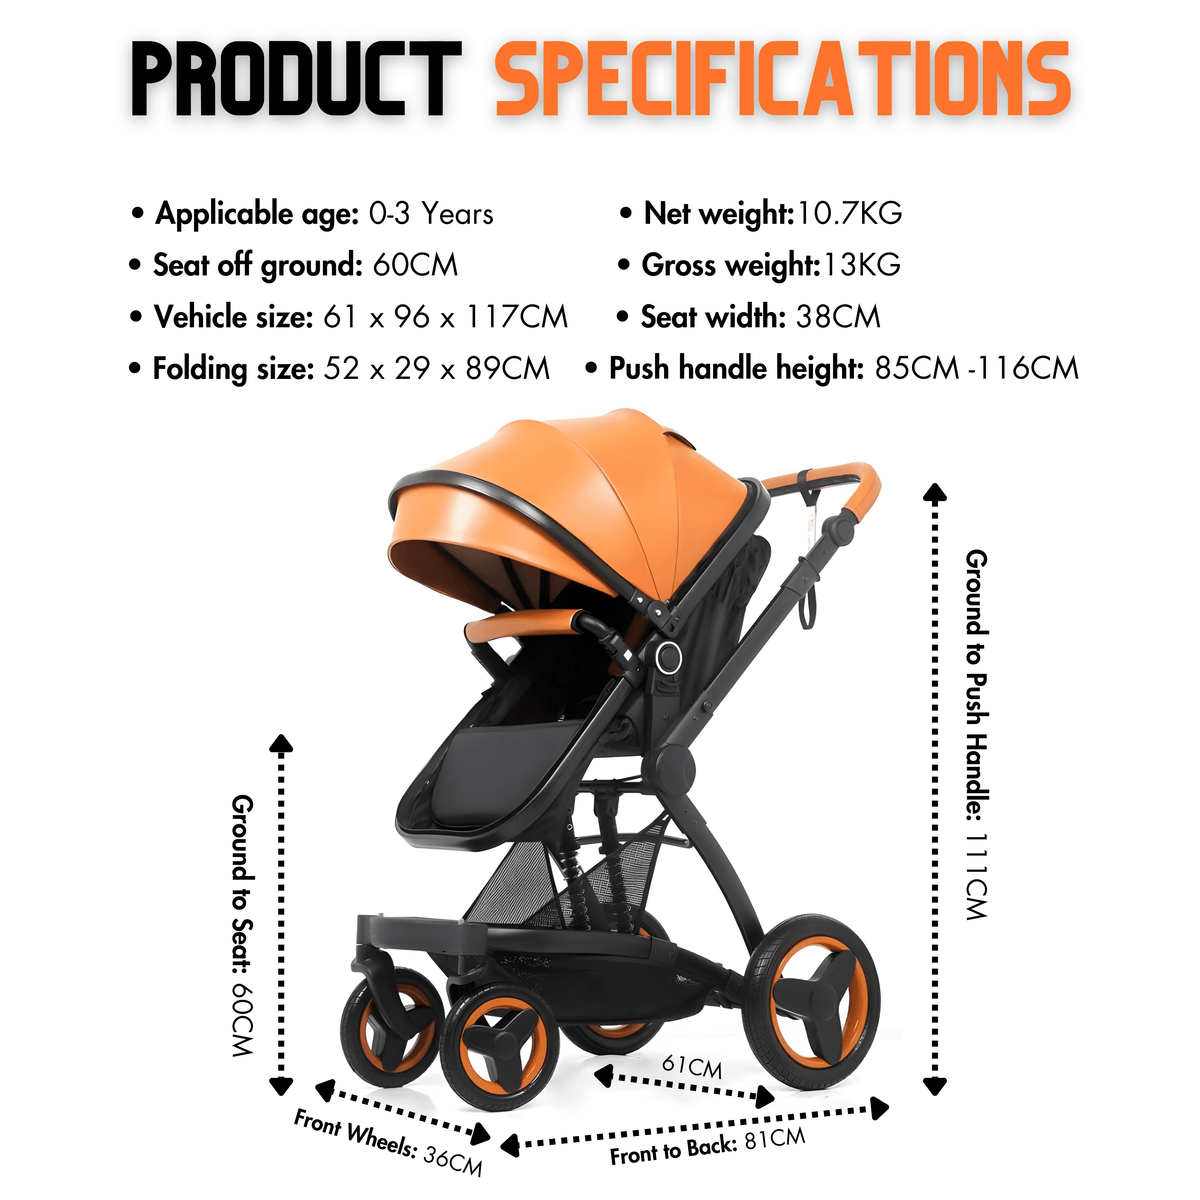 Premium Leather 3-in-1 Baby Stroller